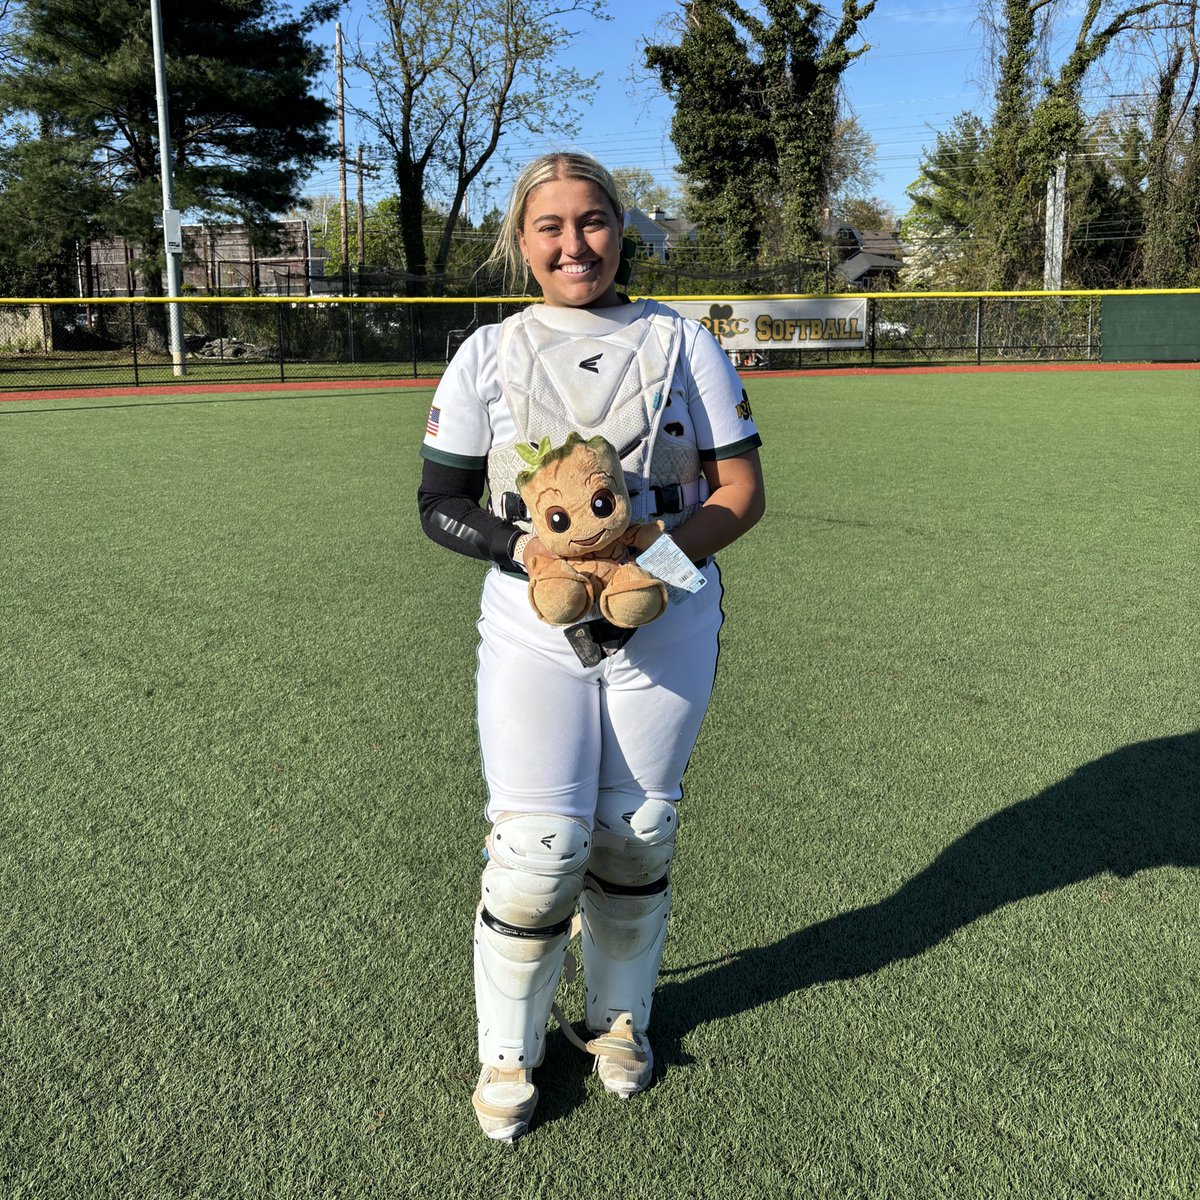 Congrats to our Week 4 Groot of the Week Winner Jordan Terefenko! She was nominated by her teammate Sophia Lasater and voted by her teammates! BE LIKE GROOT! @RBCCaseys @CaseysSports @ShoreConfSB @JordanTerefenko @LasaterSophia @Jake_Aferiat @JakeMatson @nlowe11